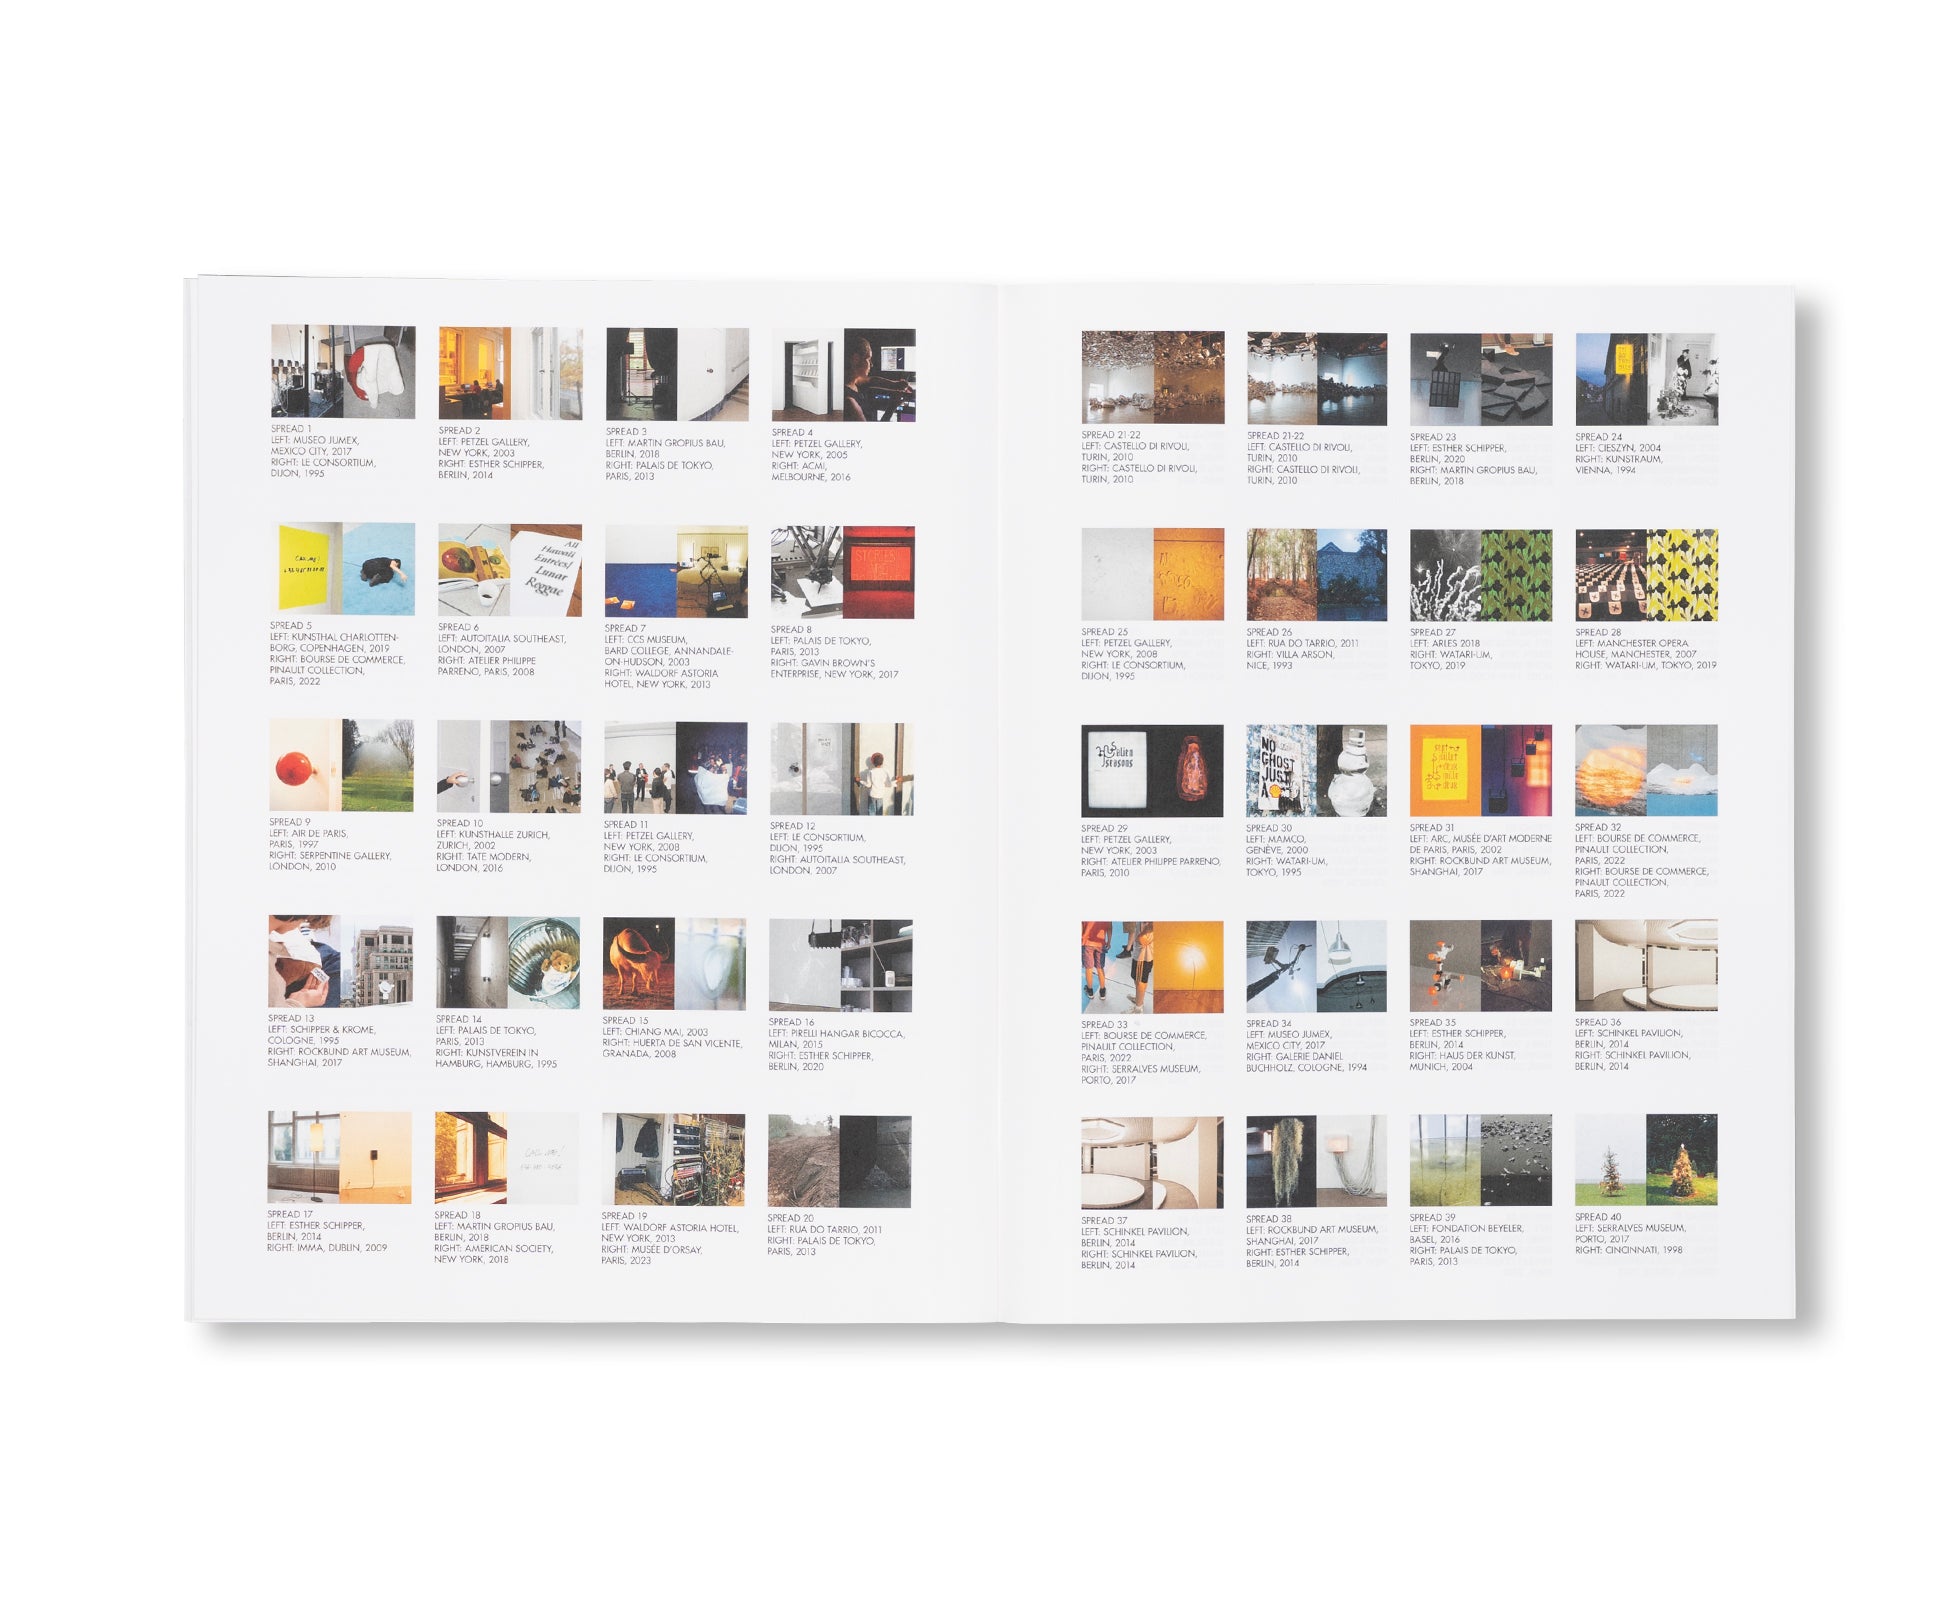 REVUE CAHIERS D’ART, 2023, PHILIPPE PARRENO by Philippe Parreno [STANDARD EDITION]